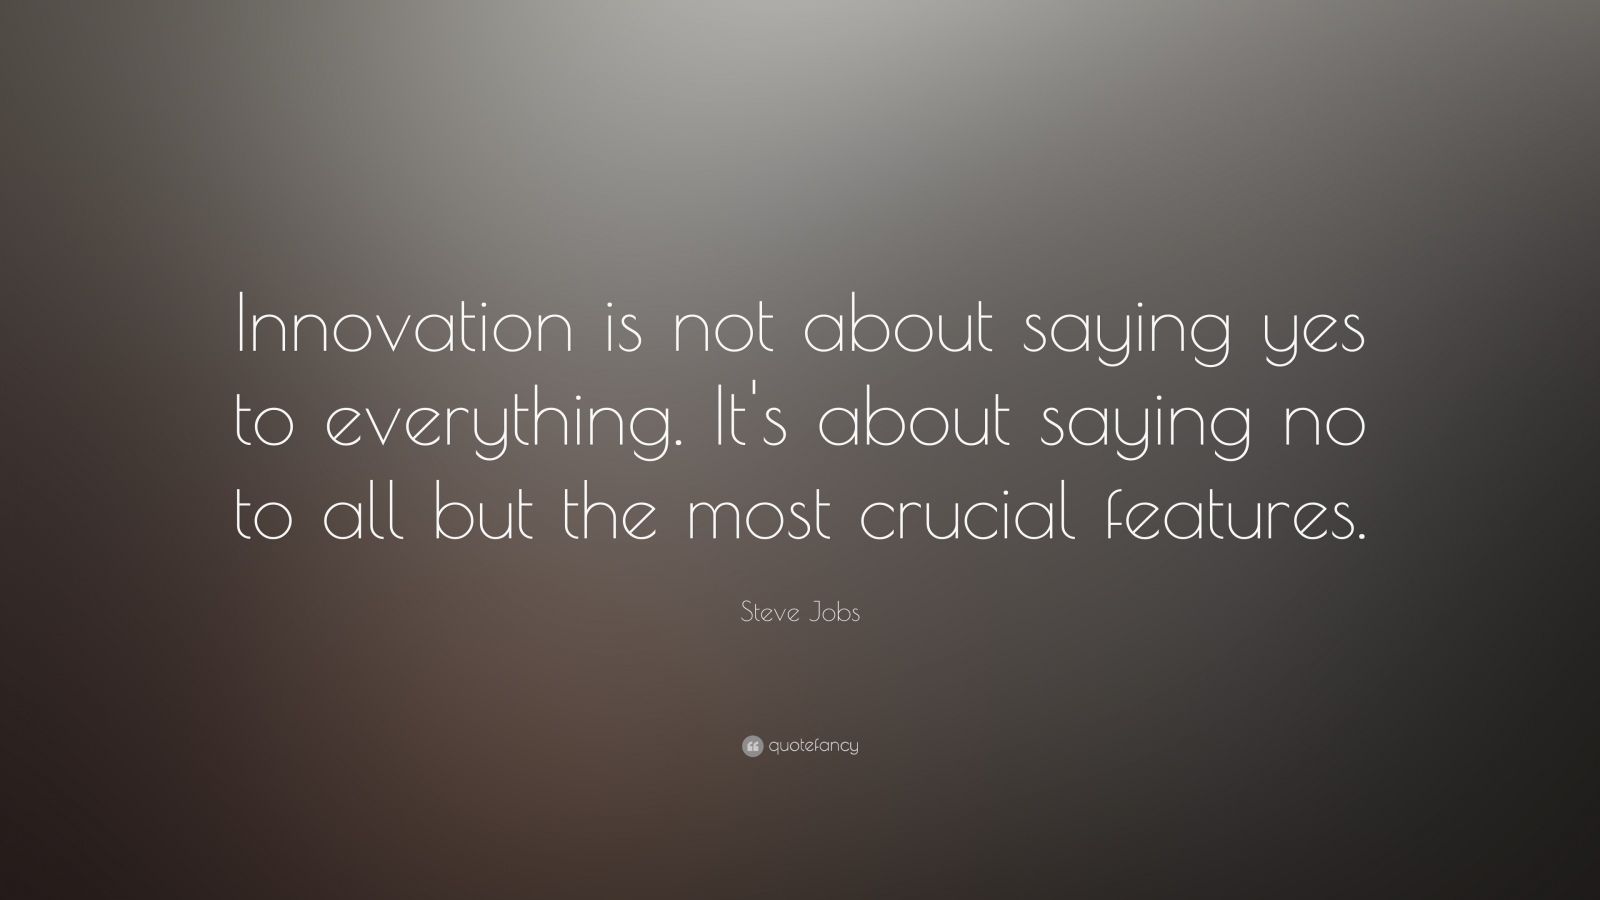 Steve Jobs Quote: “Innovation is not about saying yes to everything. It ...